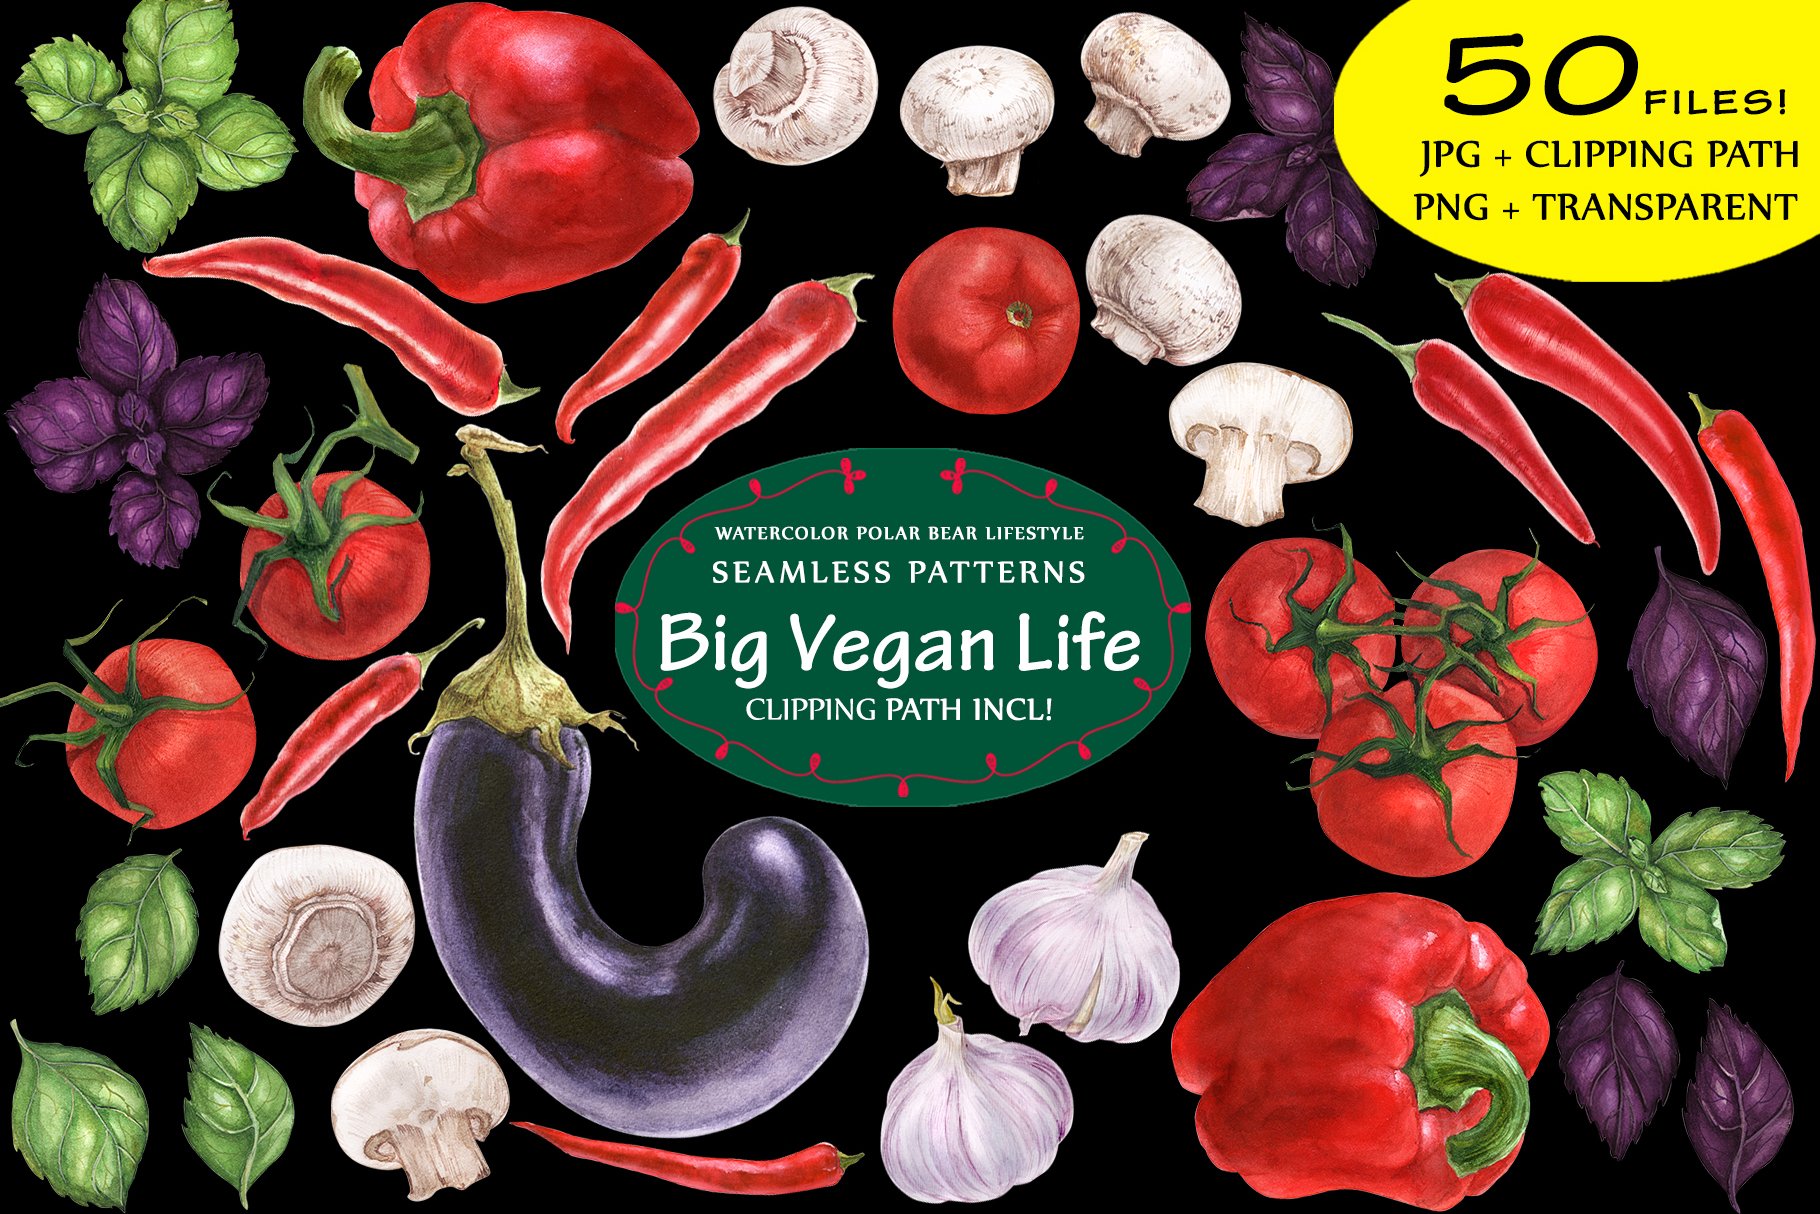 The main page is a preview of vegetables on a black sea background.